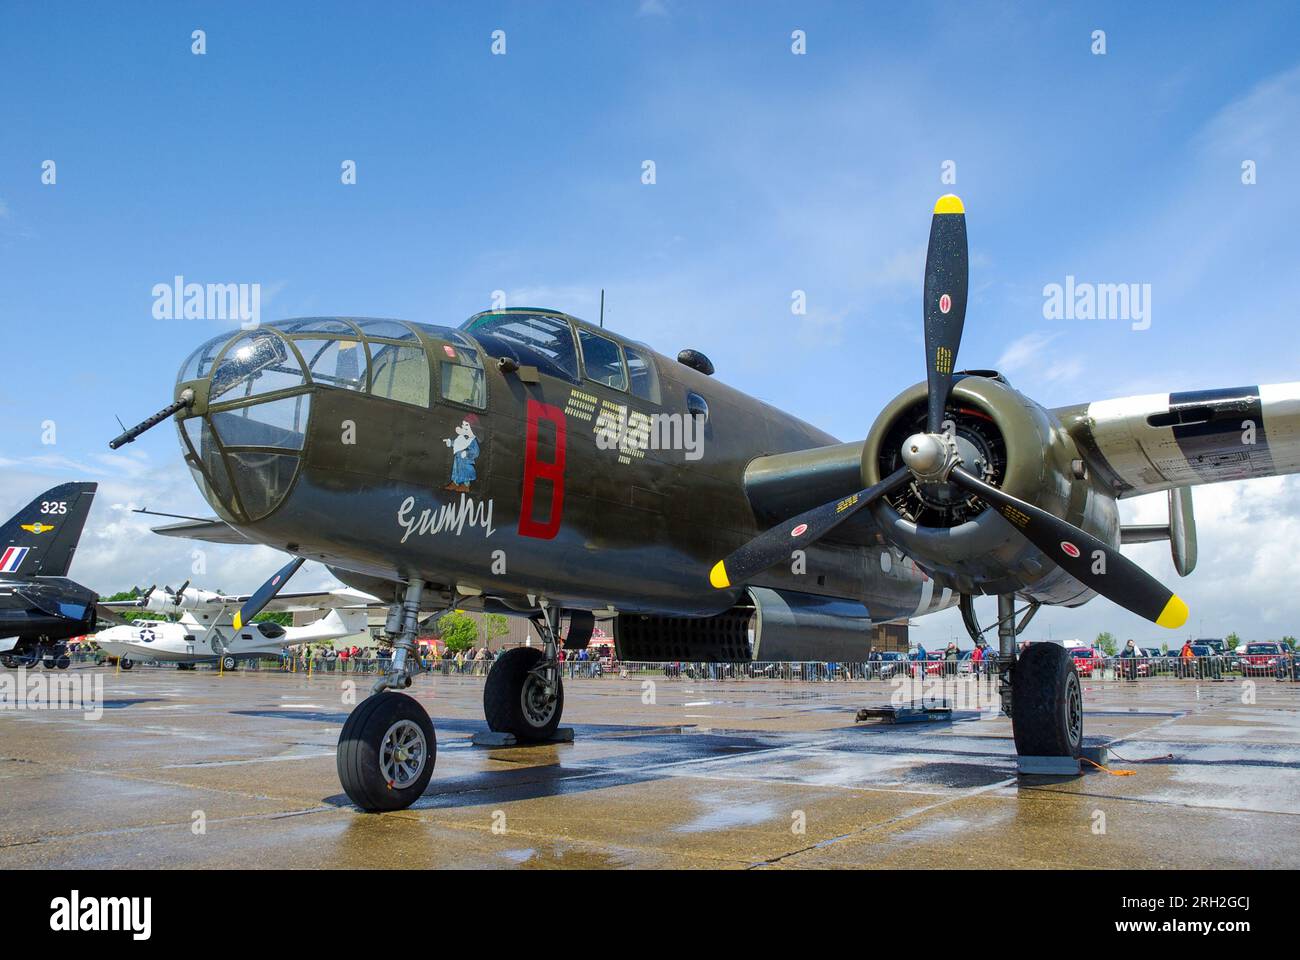 North American B-25D Mitchell II bomber plane N25644 named Grumpy at Duxford, Cambridgeshire, UK, prior to flight to USA as N88972 Stock Photo